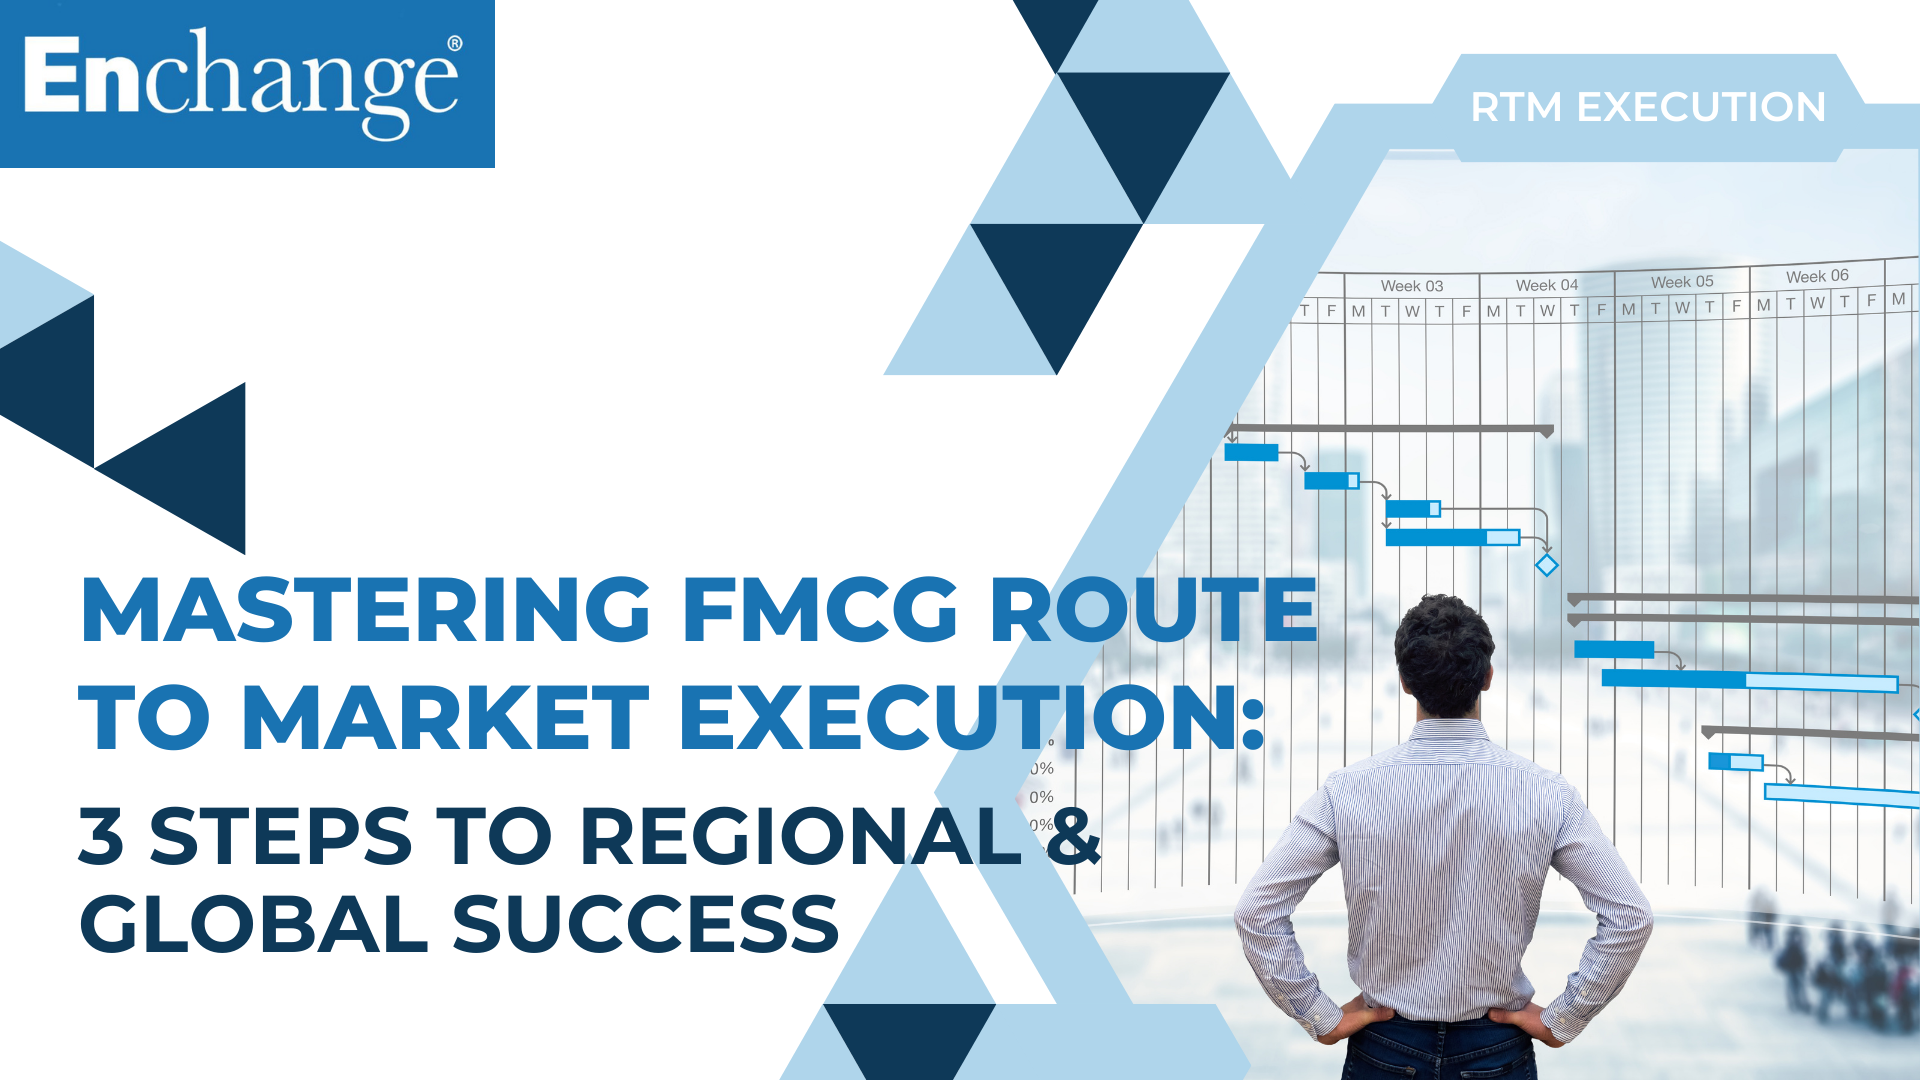 <div>Mastering FMCG Route to Market Execution: 3 Steps to Regional & Global Success</div>